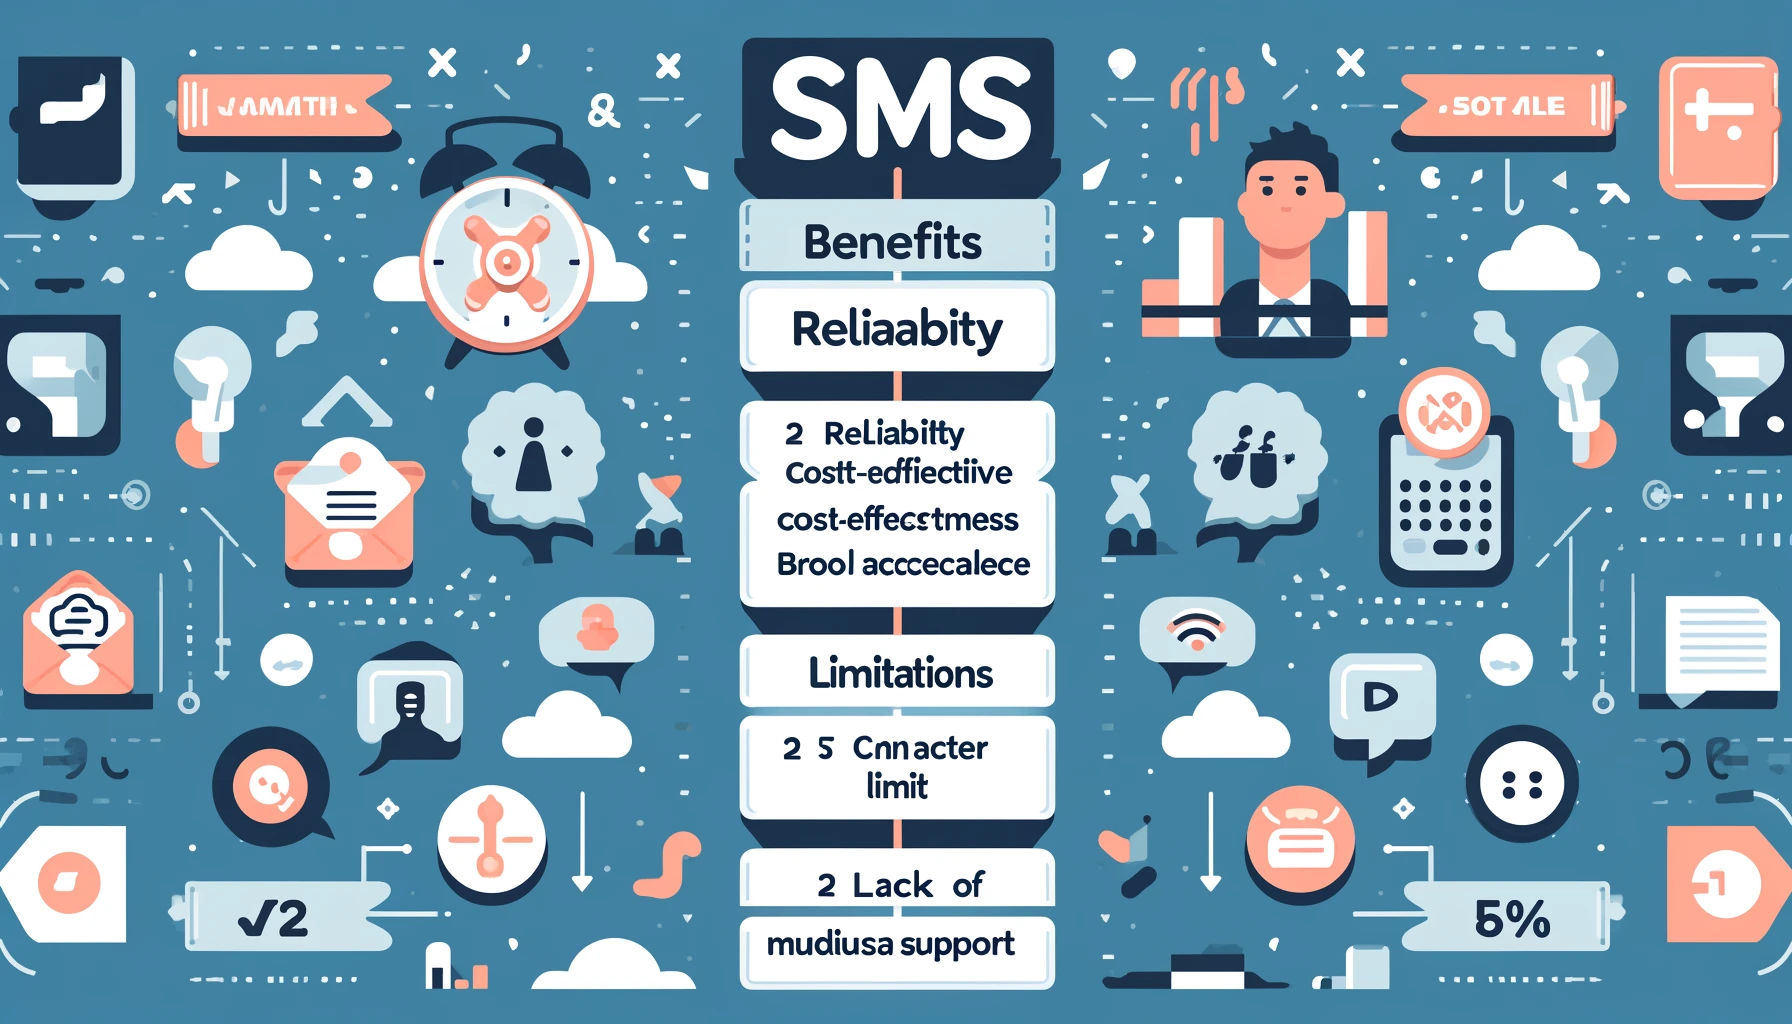 An illustration of SMS communication between mobile devices.